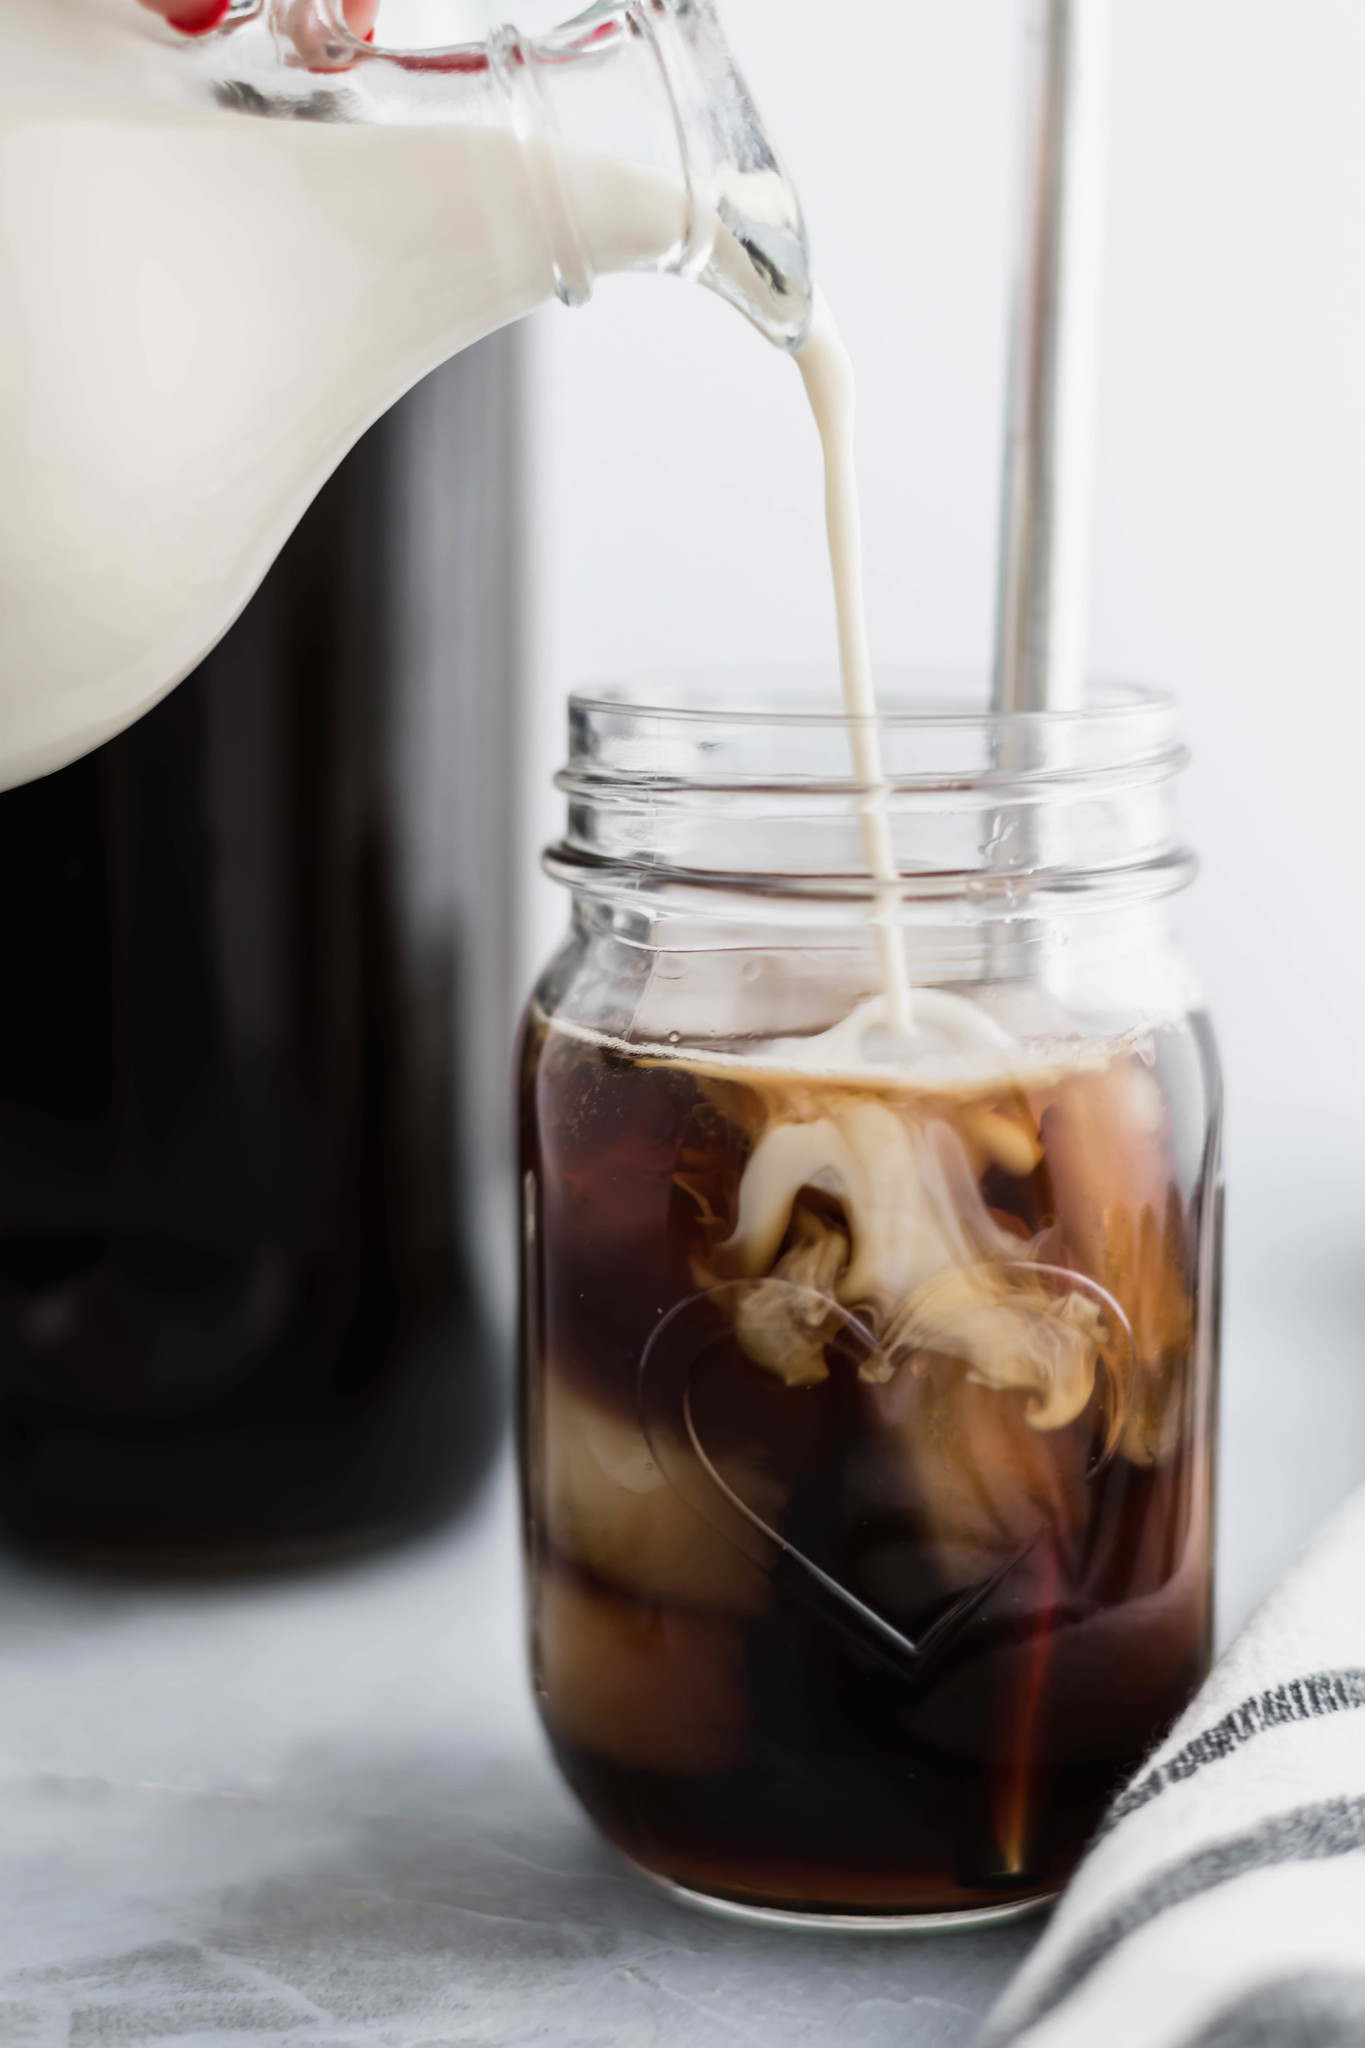 It's easier than you think to make Homemade Coffee Creamer. Just 3 ingredients needed with add-in options for all the fun flavors.